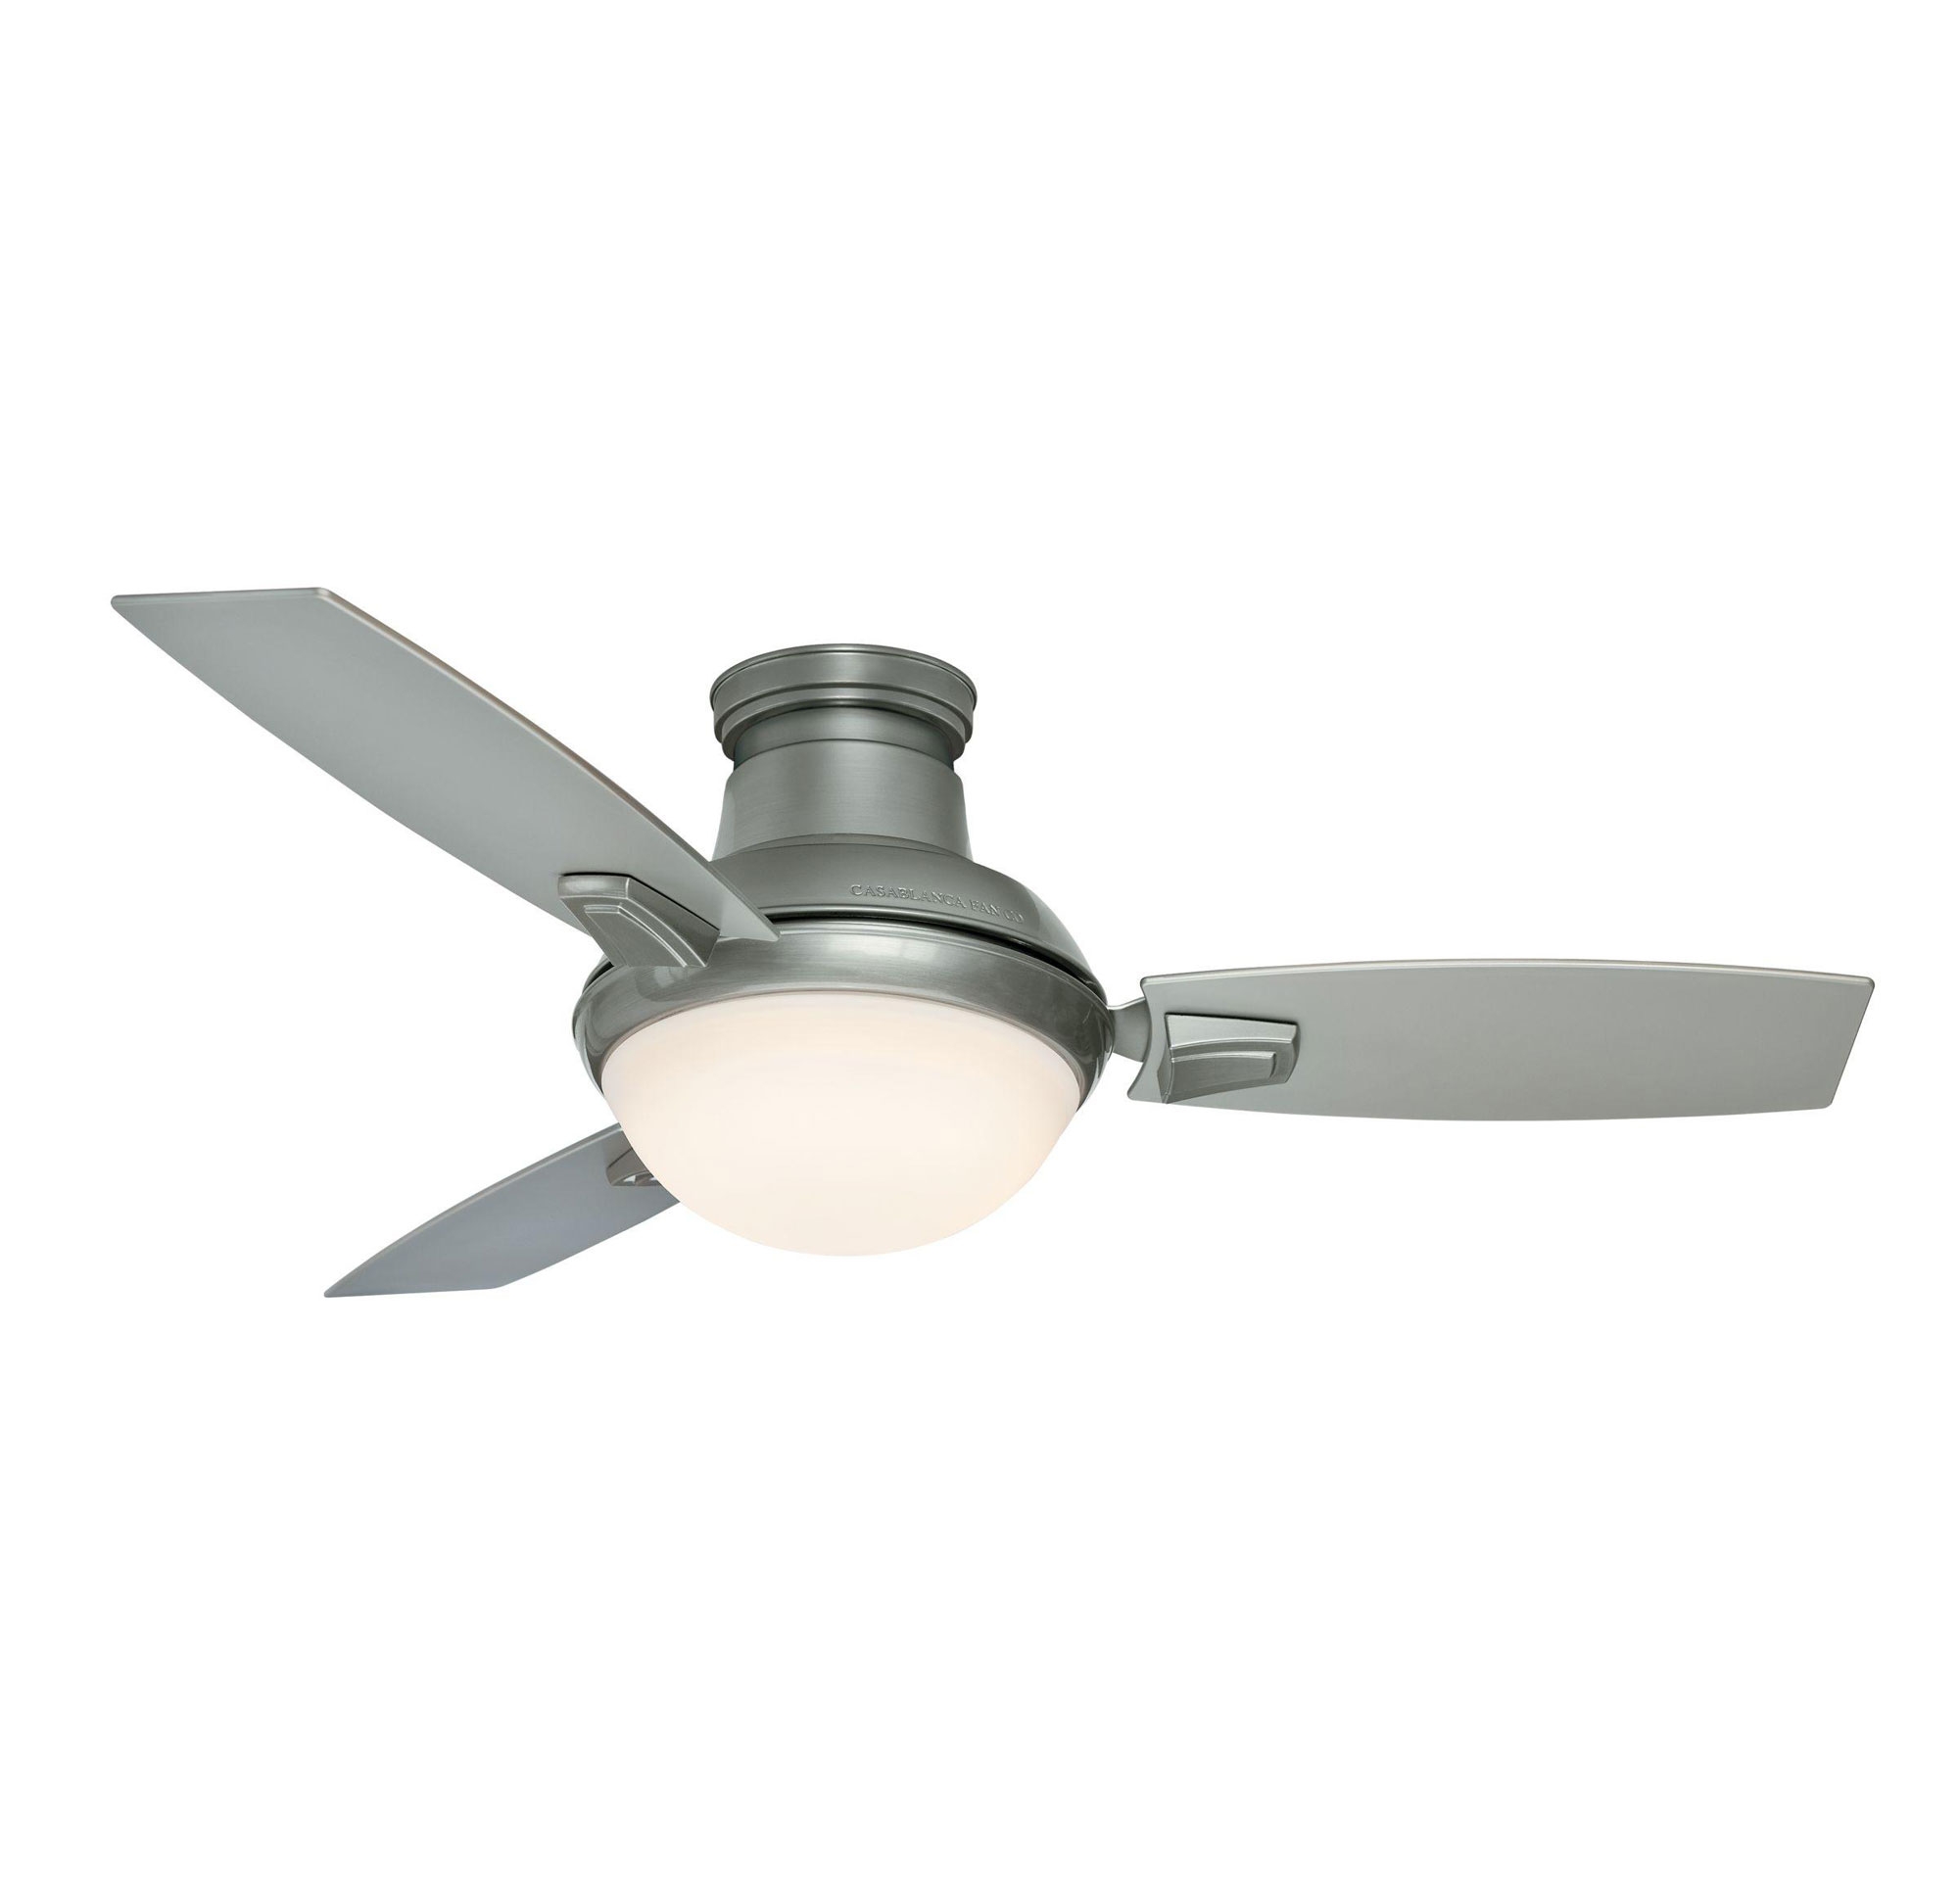 Permalink to Casablanca Hugger Ceiling Fans With Lights